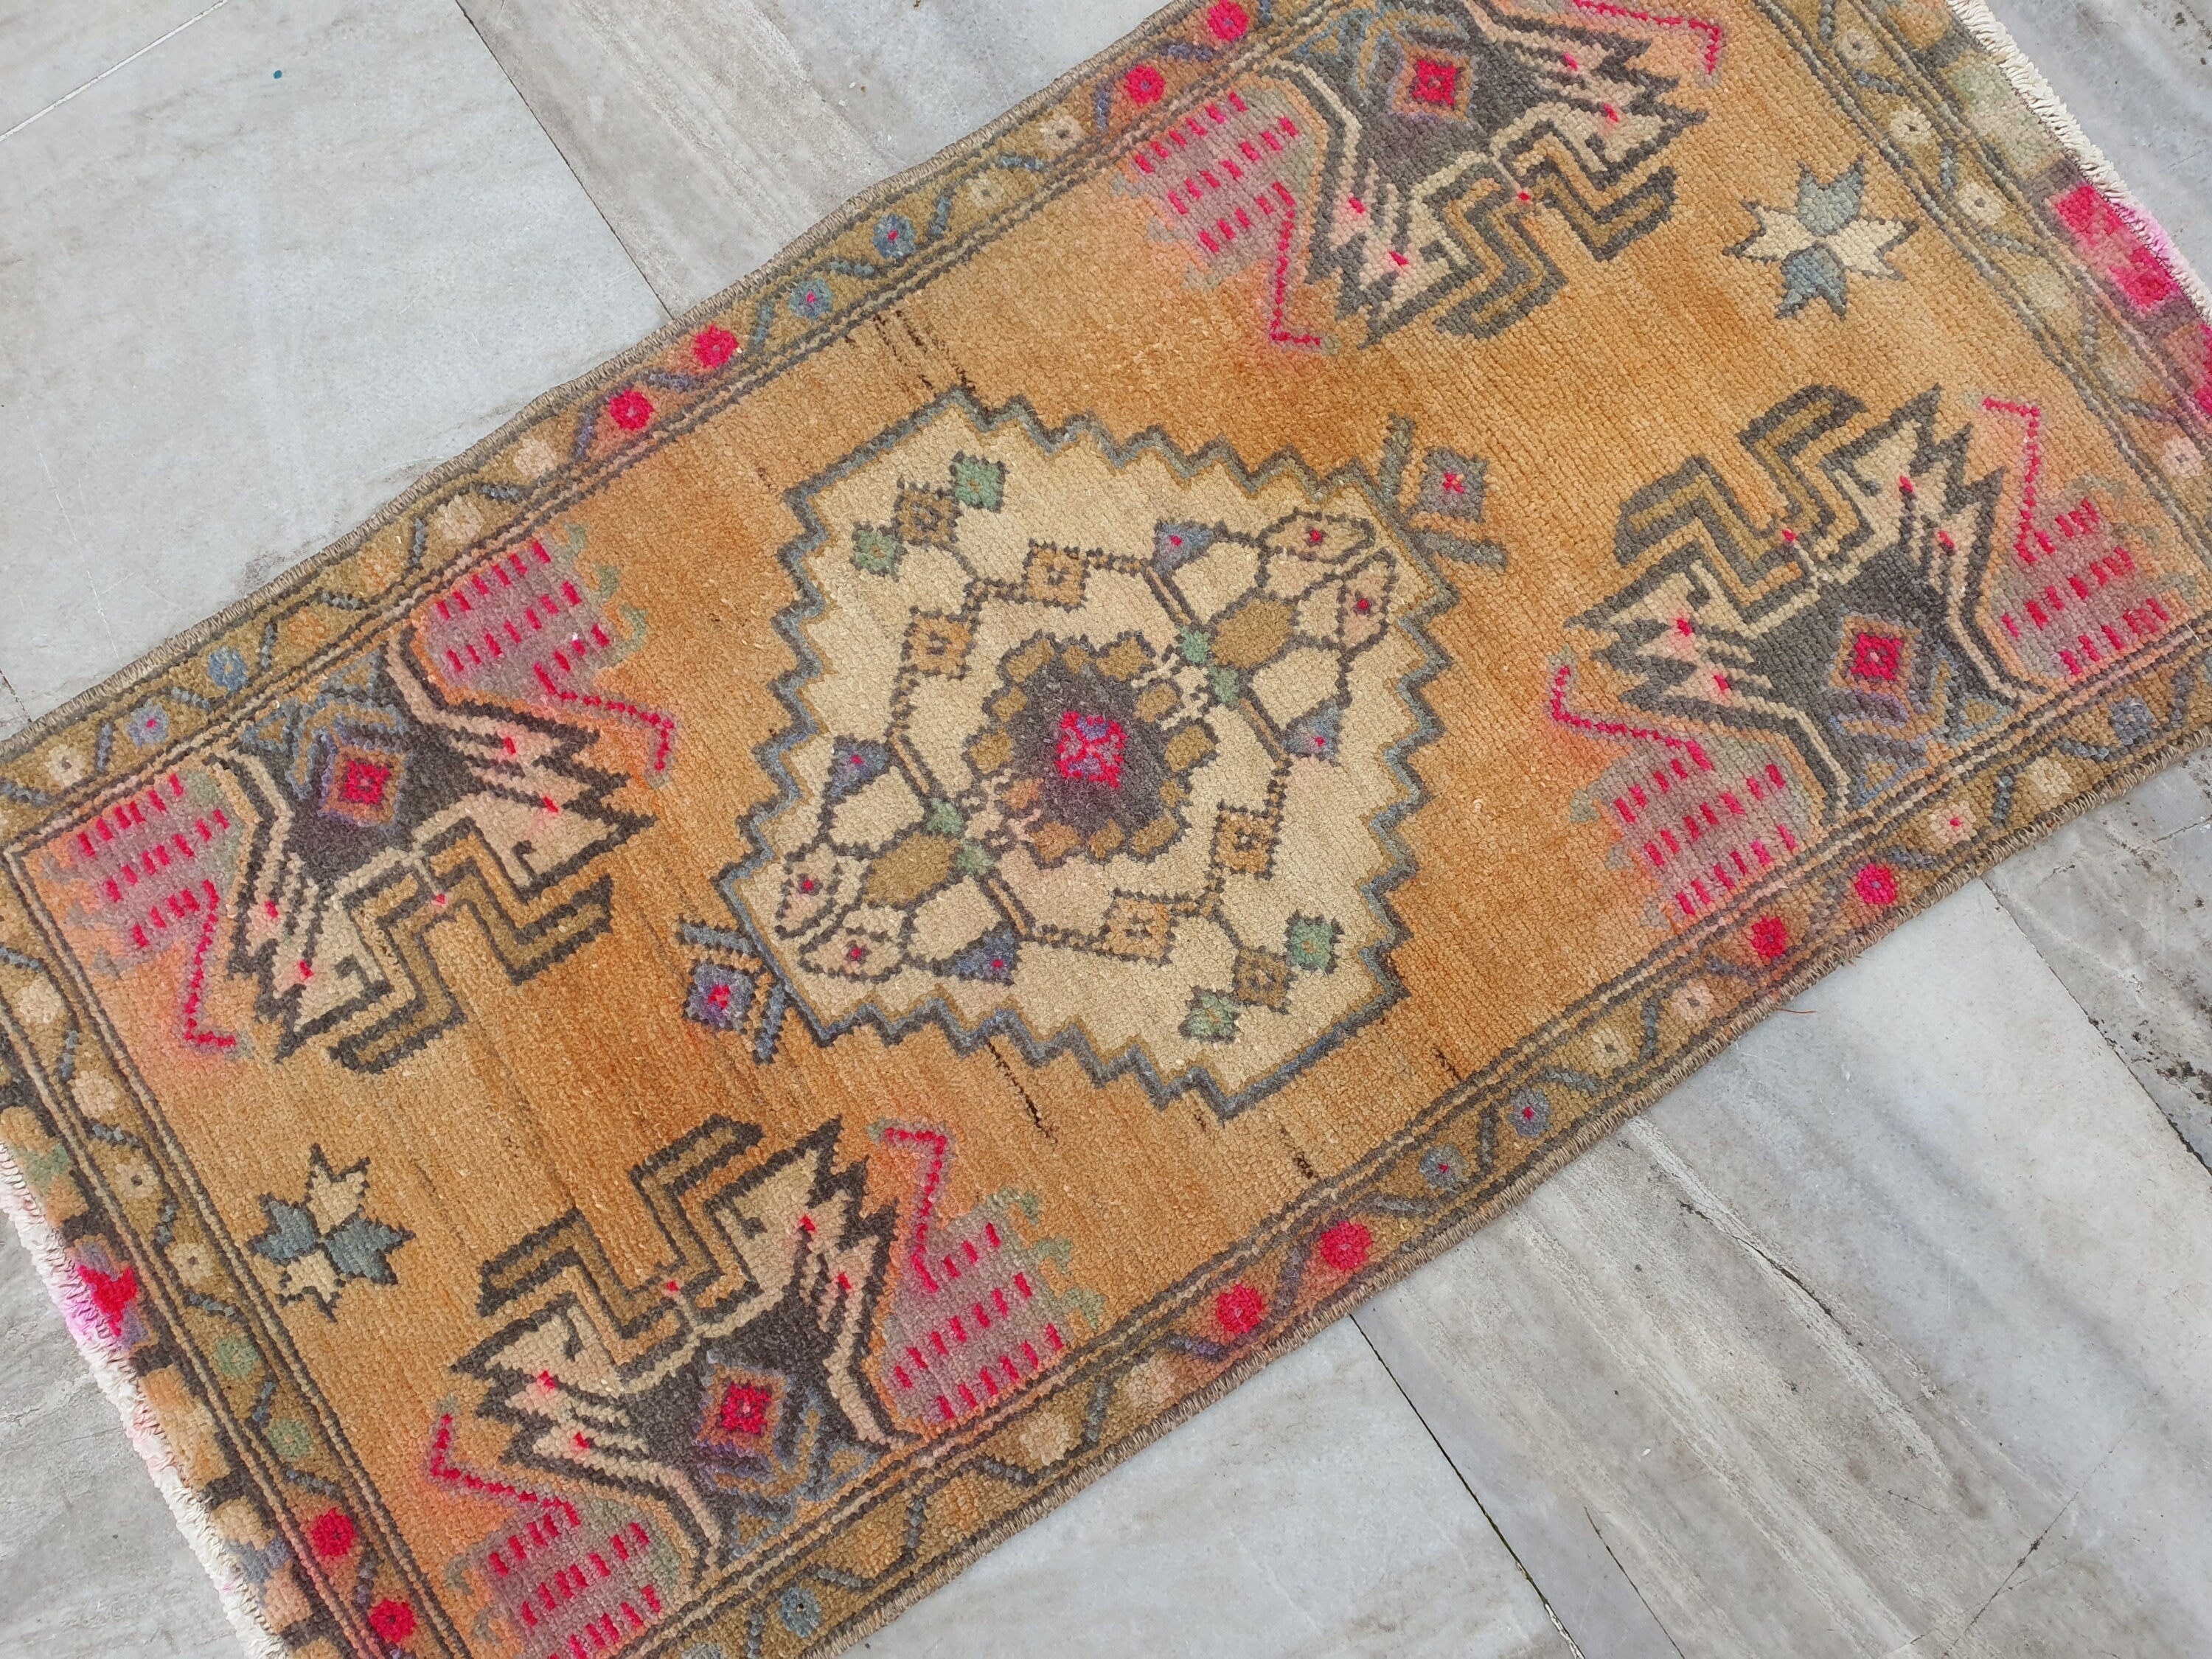 Small Turkish Rug 2 ft 9 in x 1 ft 5 in, Pink and Grey Vintage Doormat Entry or Bedside Rug